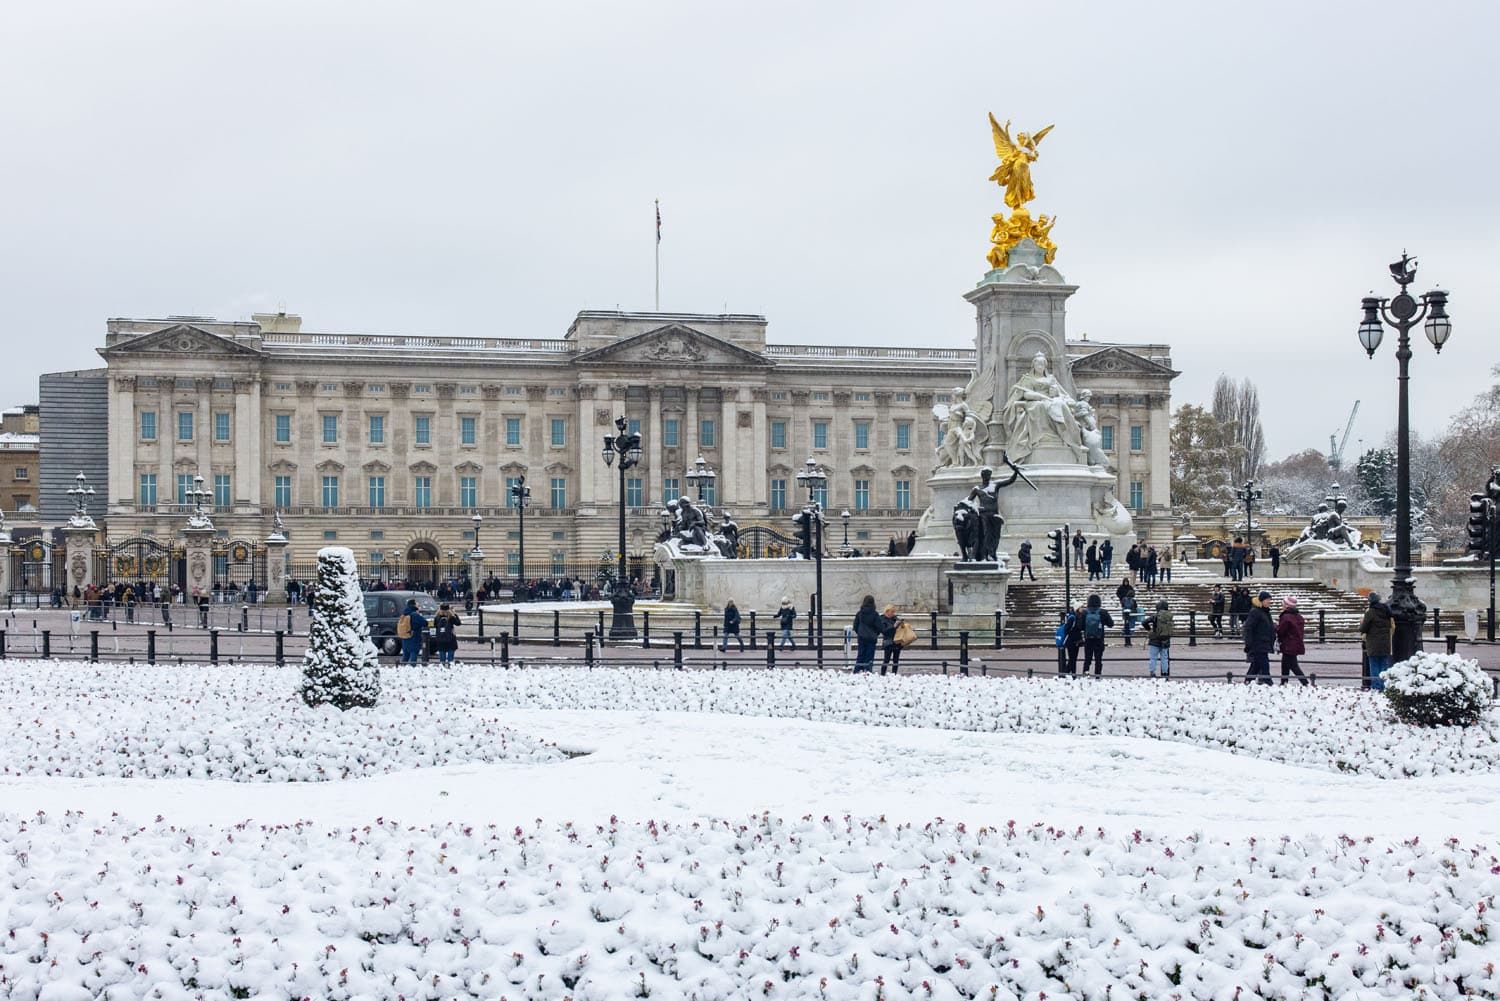 Buckingham Palace Snow | Things to do in London at Christmas